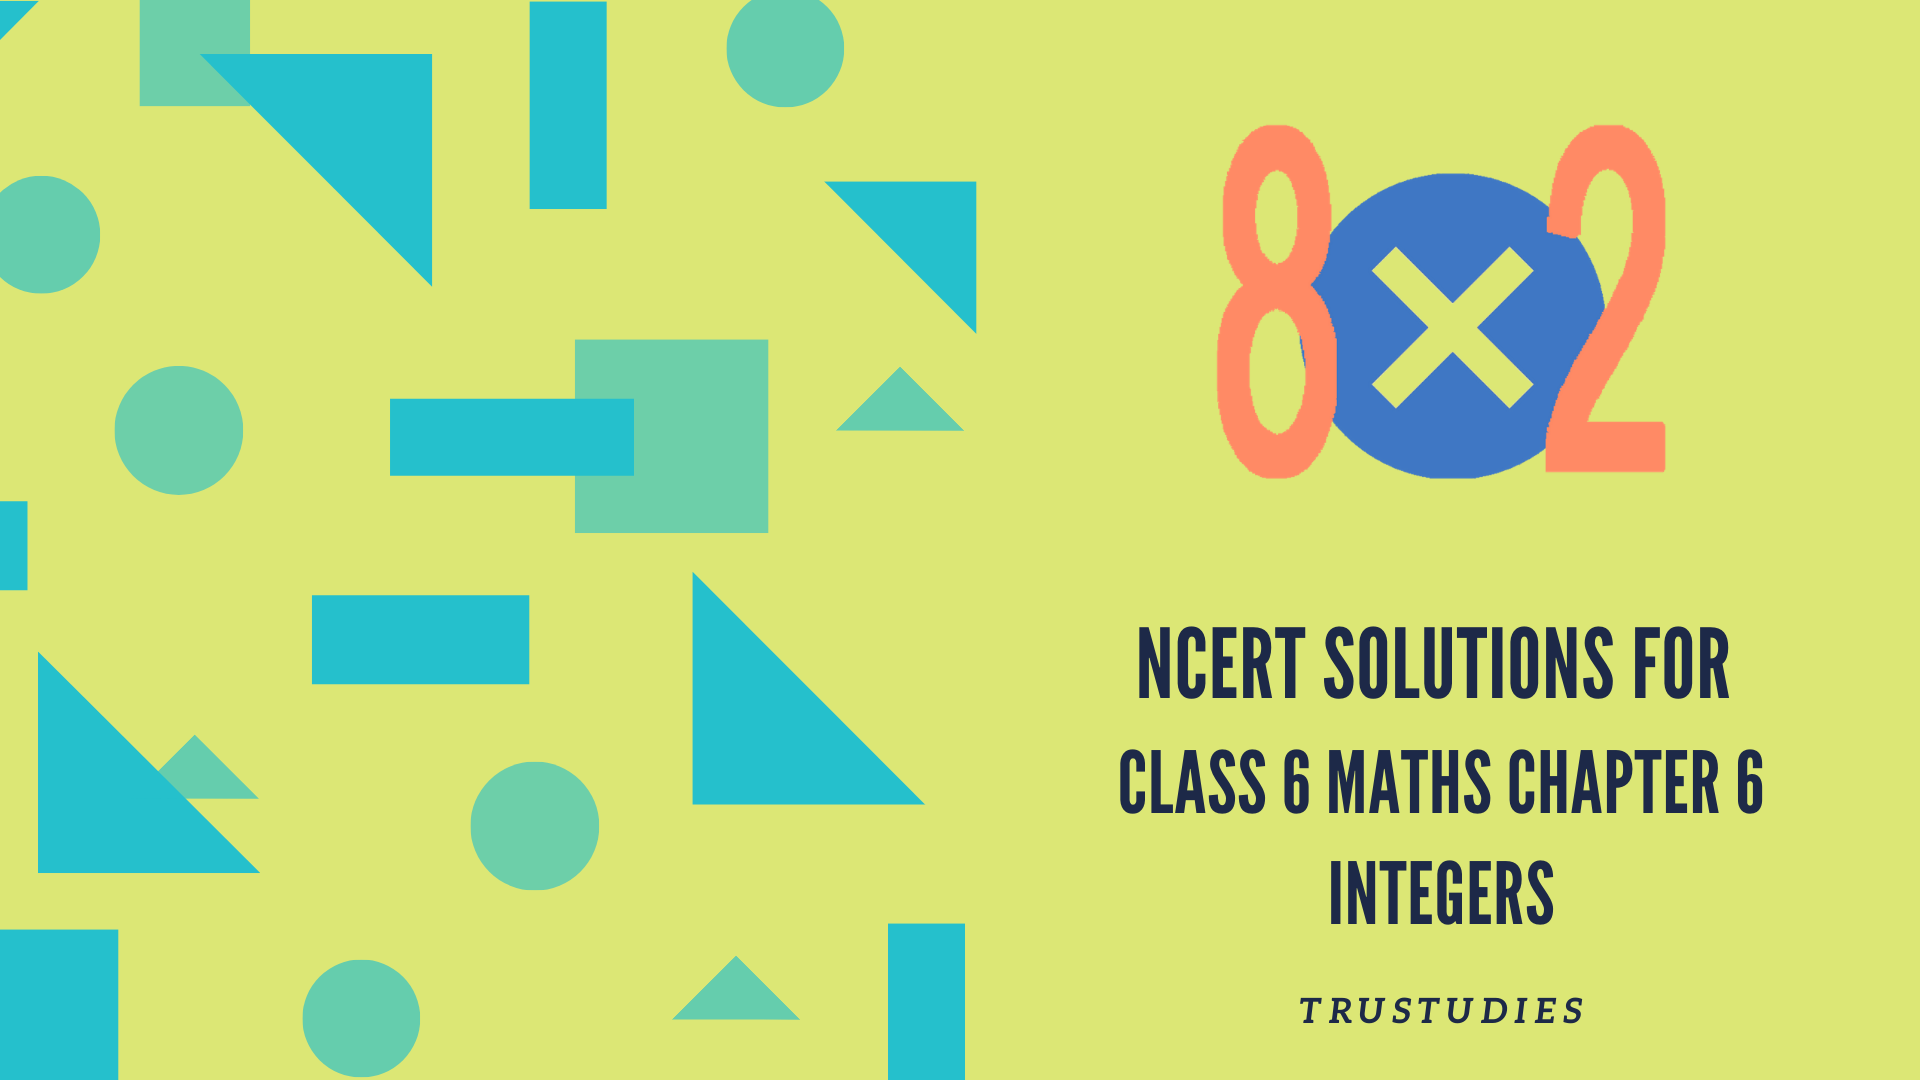 NCERT solutions for class 6 maths chapter 6 integers banner image